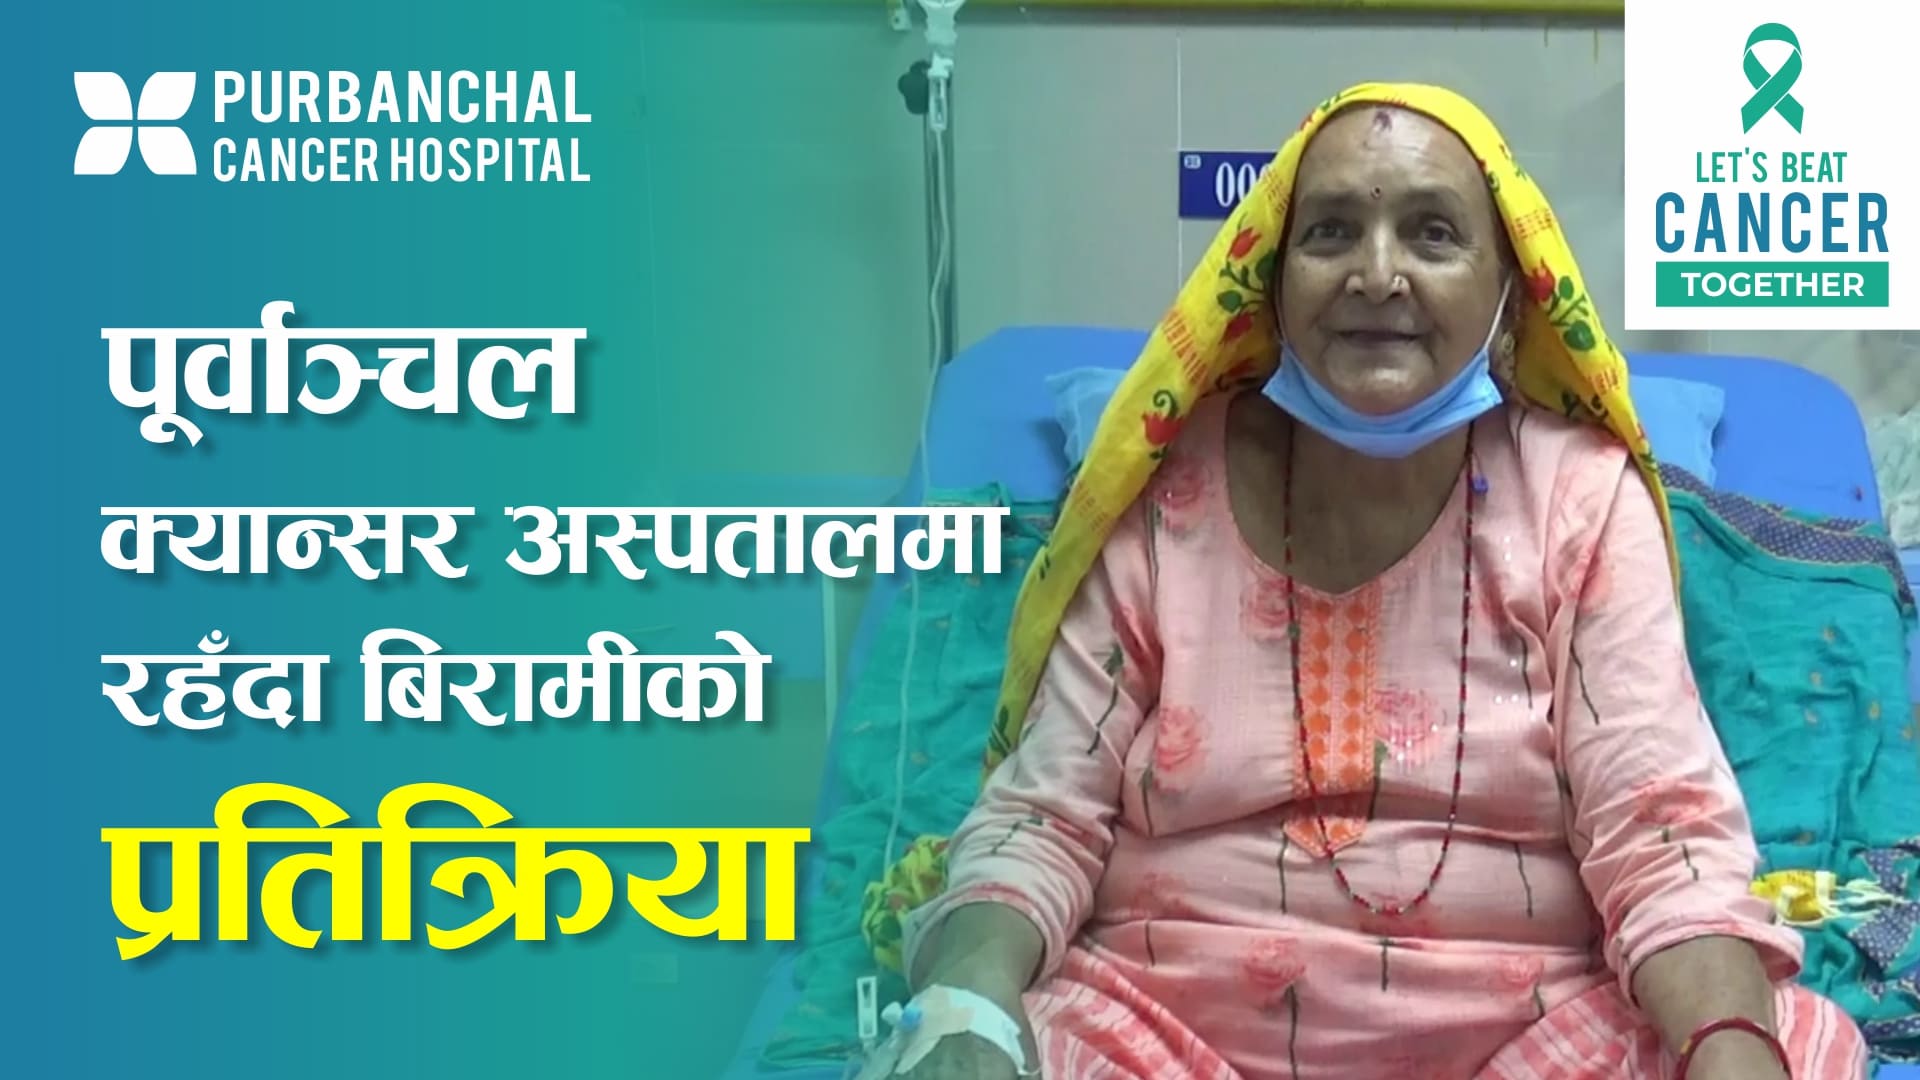 A short conversation with a patient who came to the Purbanchal Cancer Hospital for cancer treatment Image